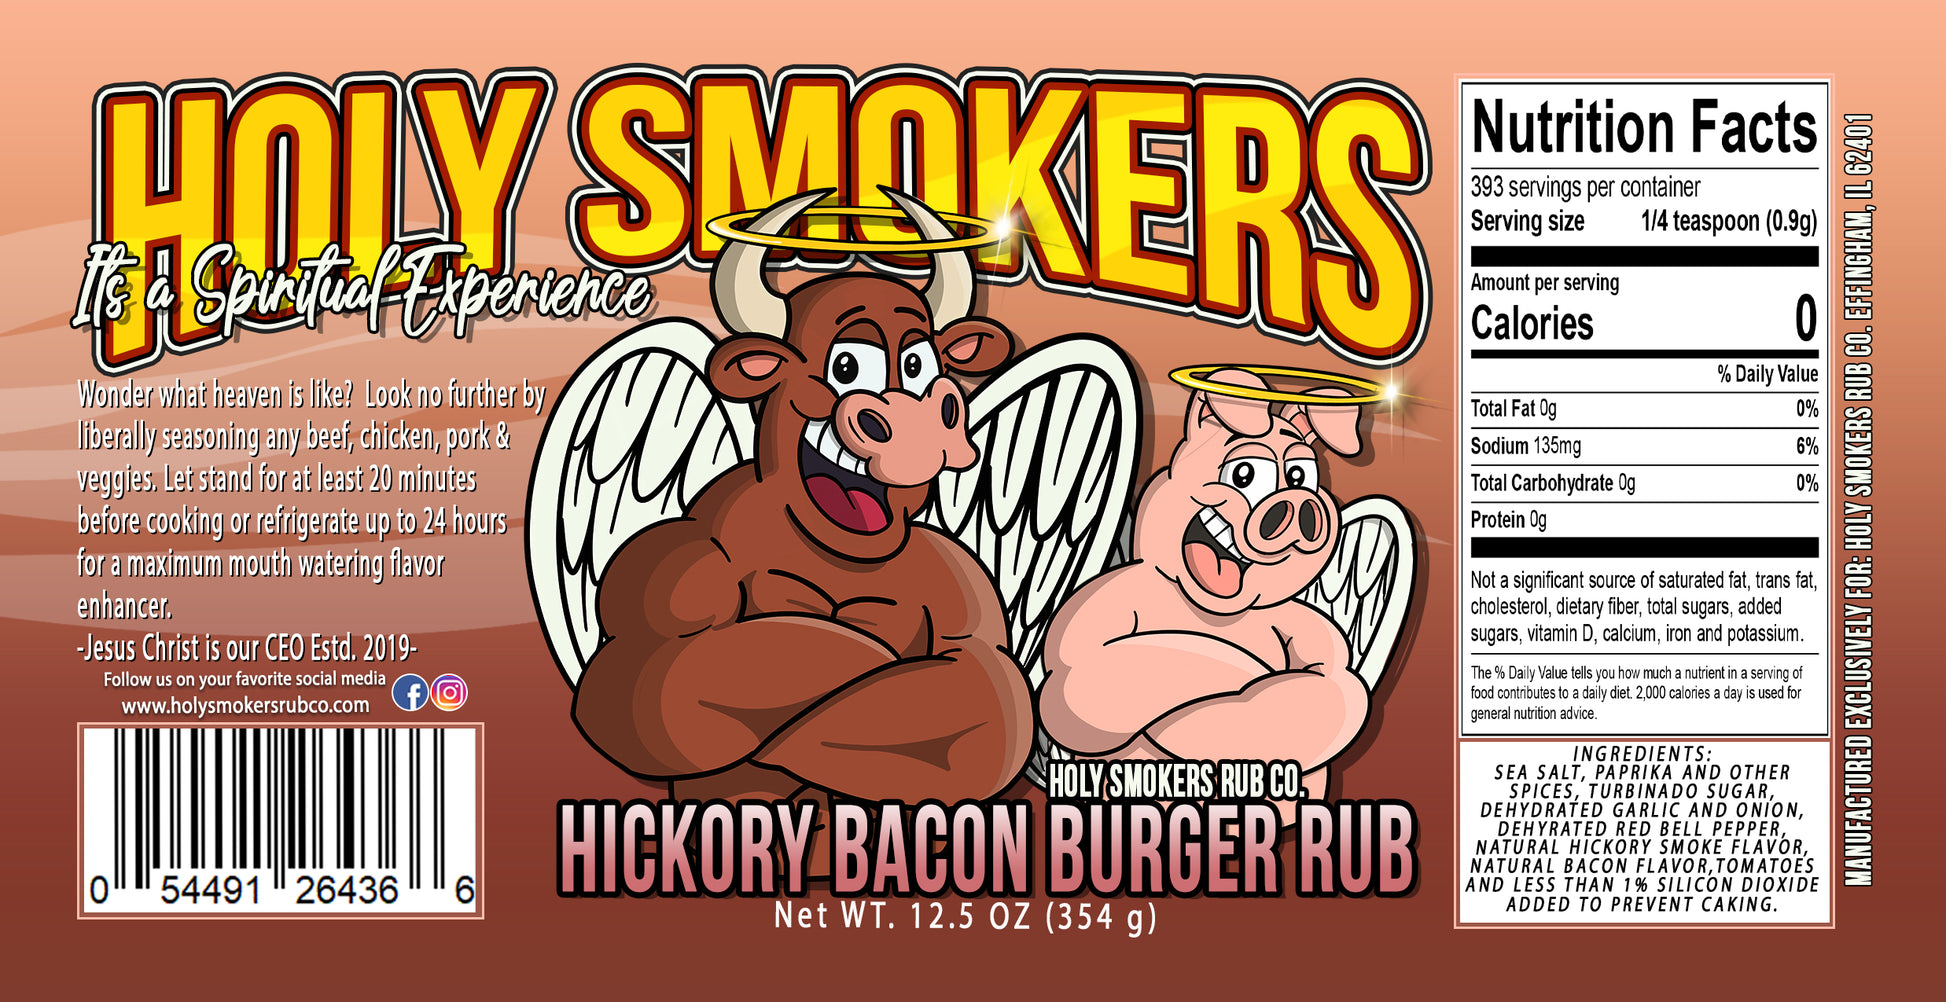 Gourmet Burger: Hickory Bacon Burger rub by Holy Smokers Rub Co, for any beef, pork, poultry, sea food and veggies